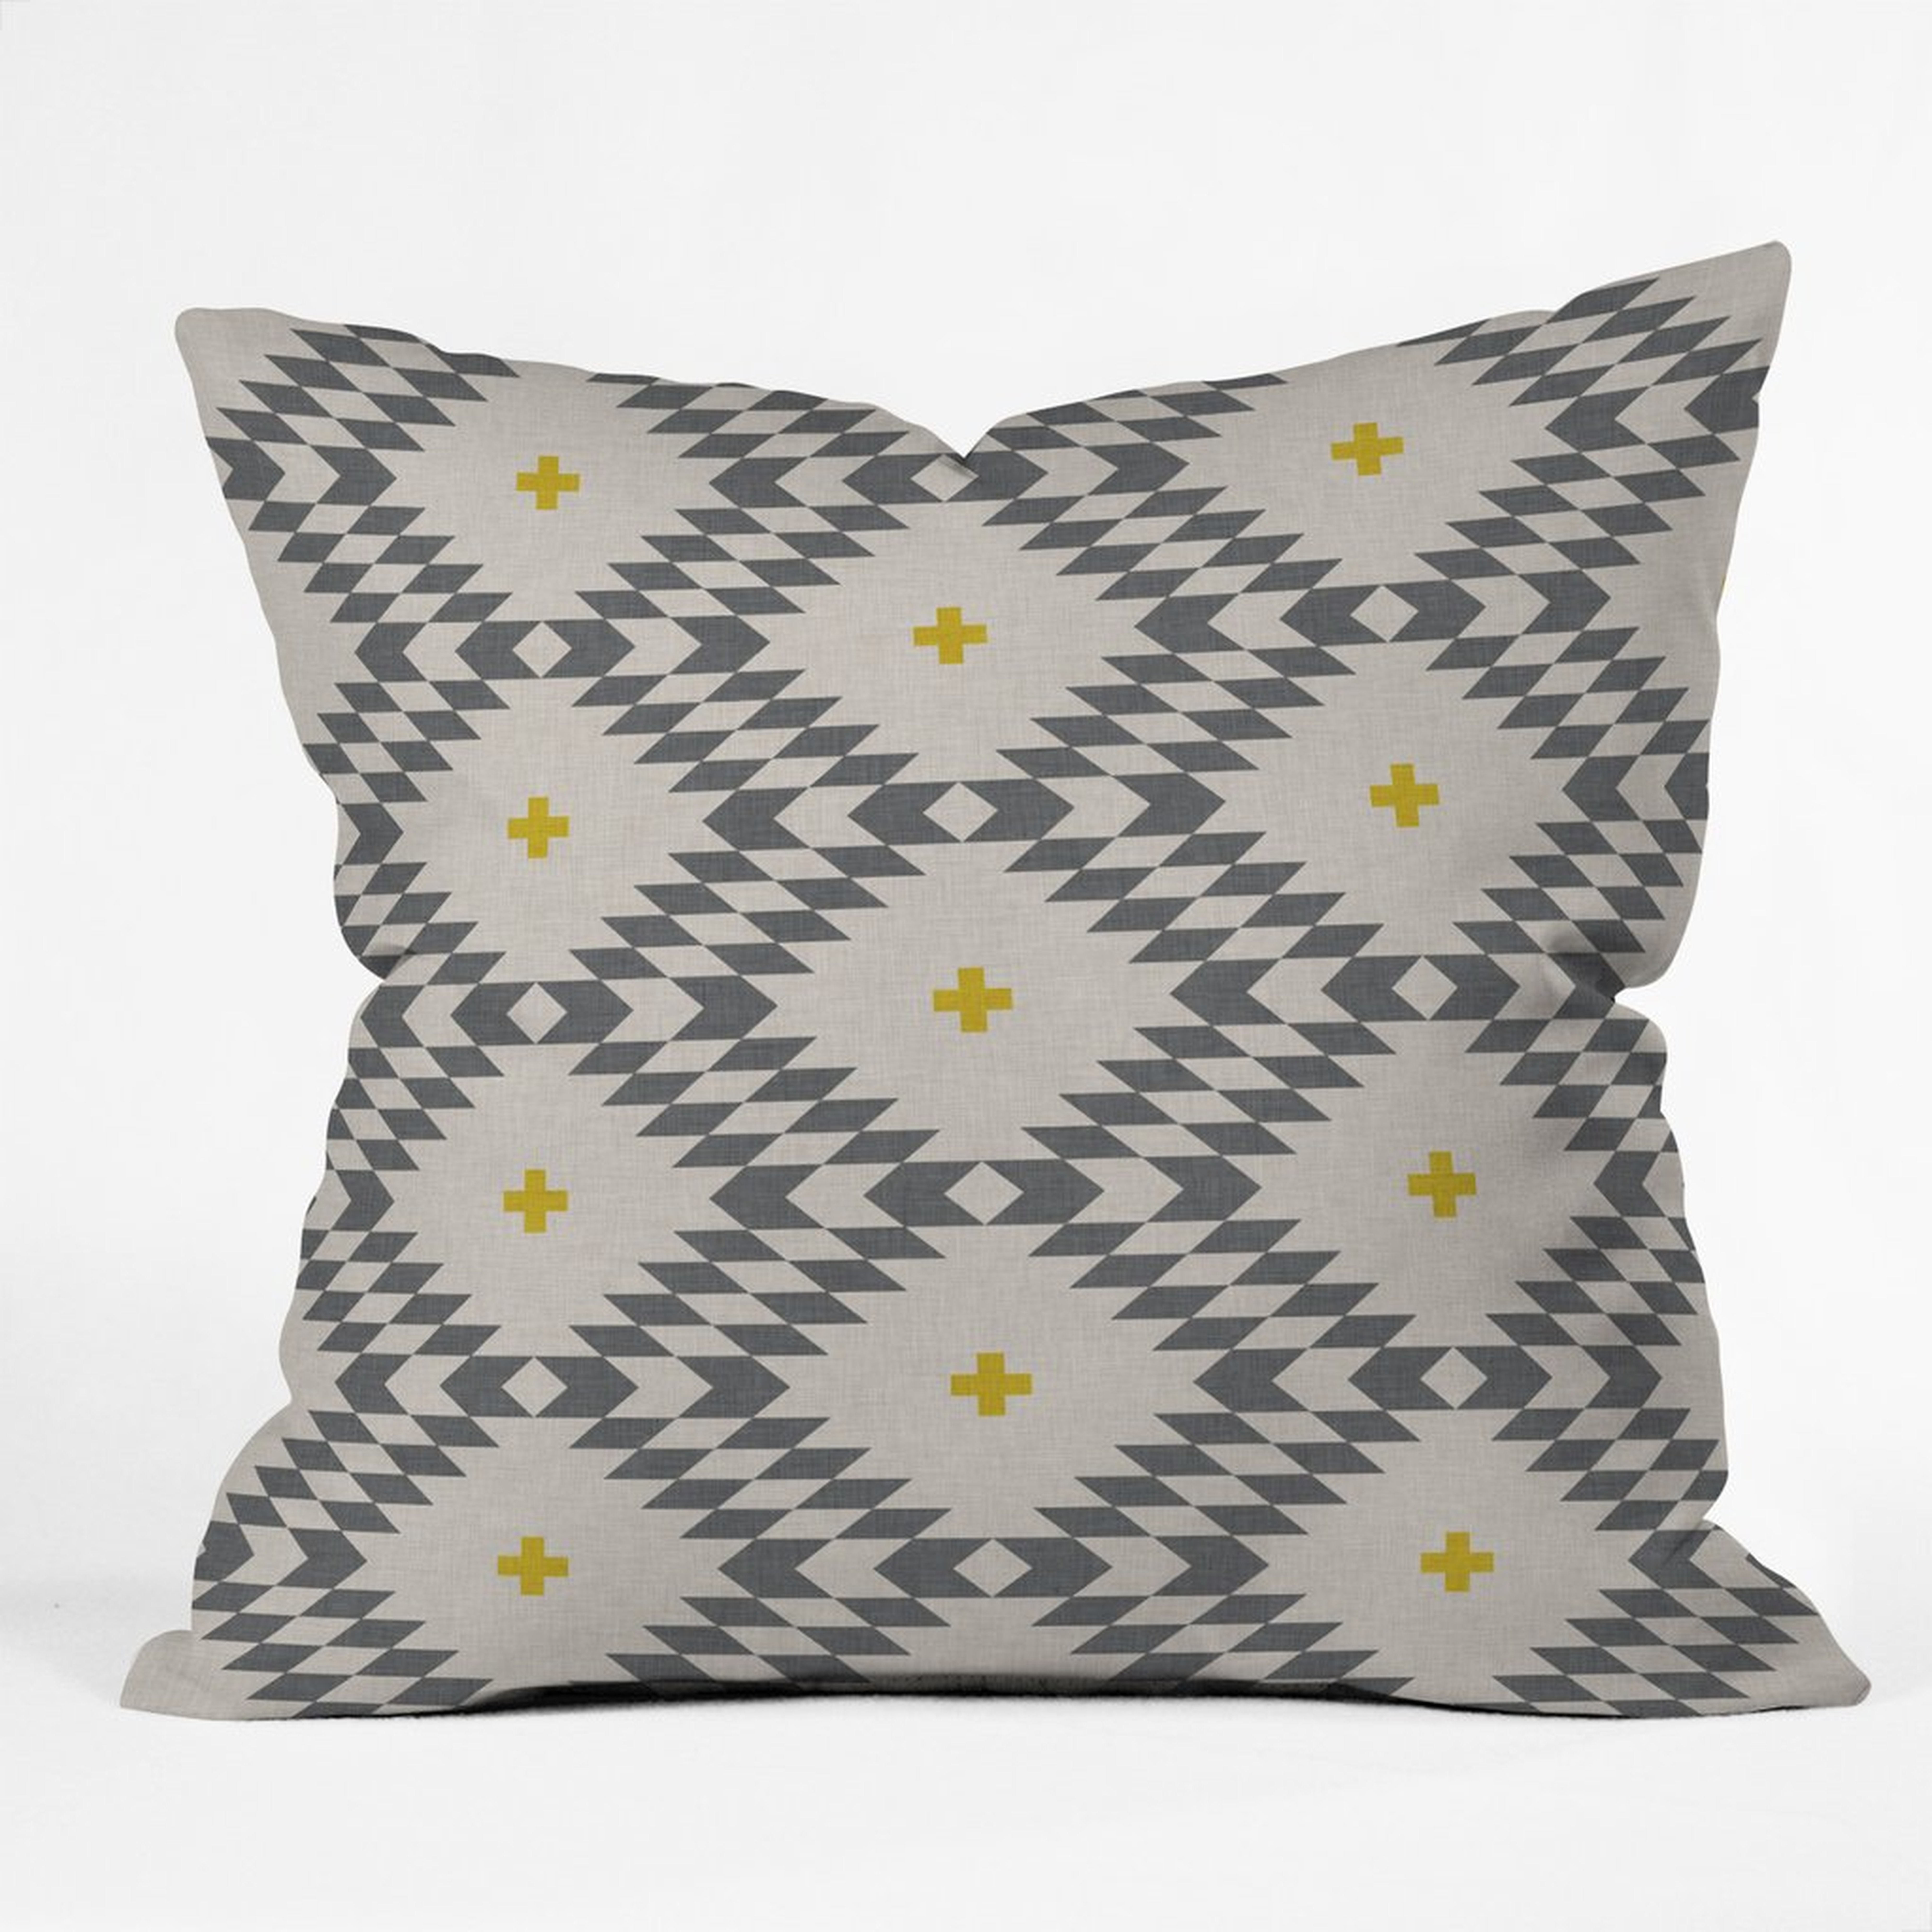 NATIVE NATURAL PLUS GOLD Throw Pillow - 18”X18” with insert - Wander Print Co.